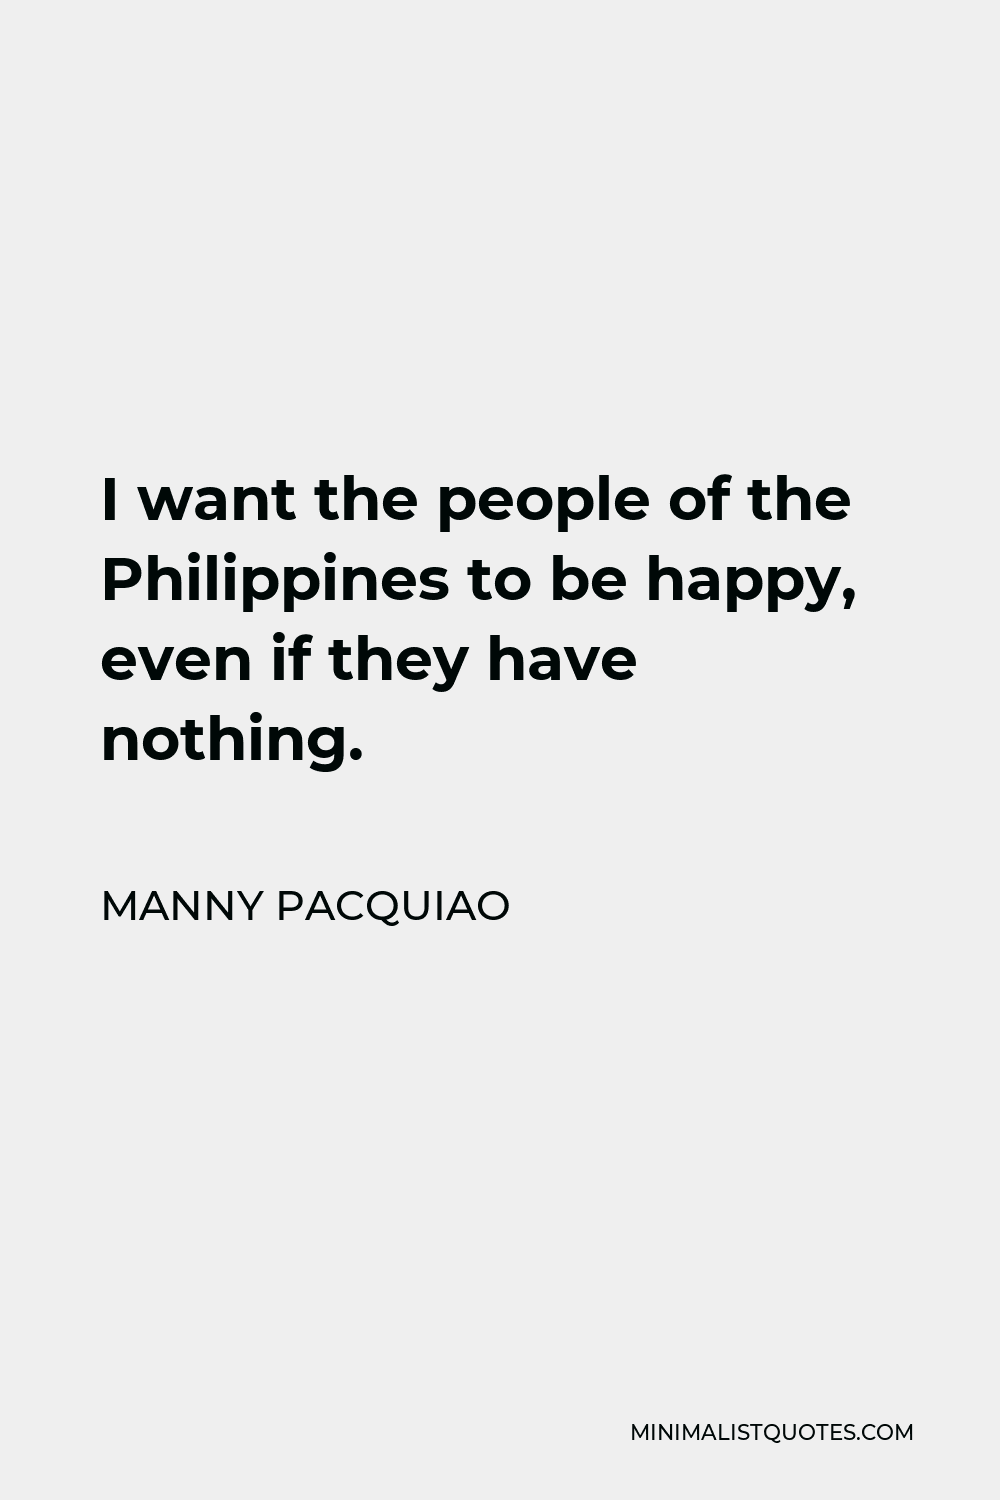 Manny Pacquiao Quote - I want the people of the Philippines to be happy, even if they have nothing.